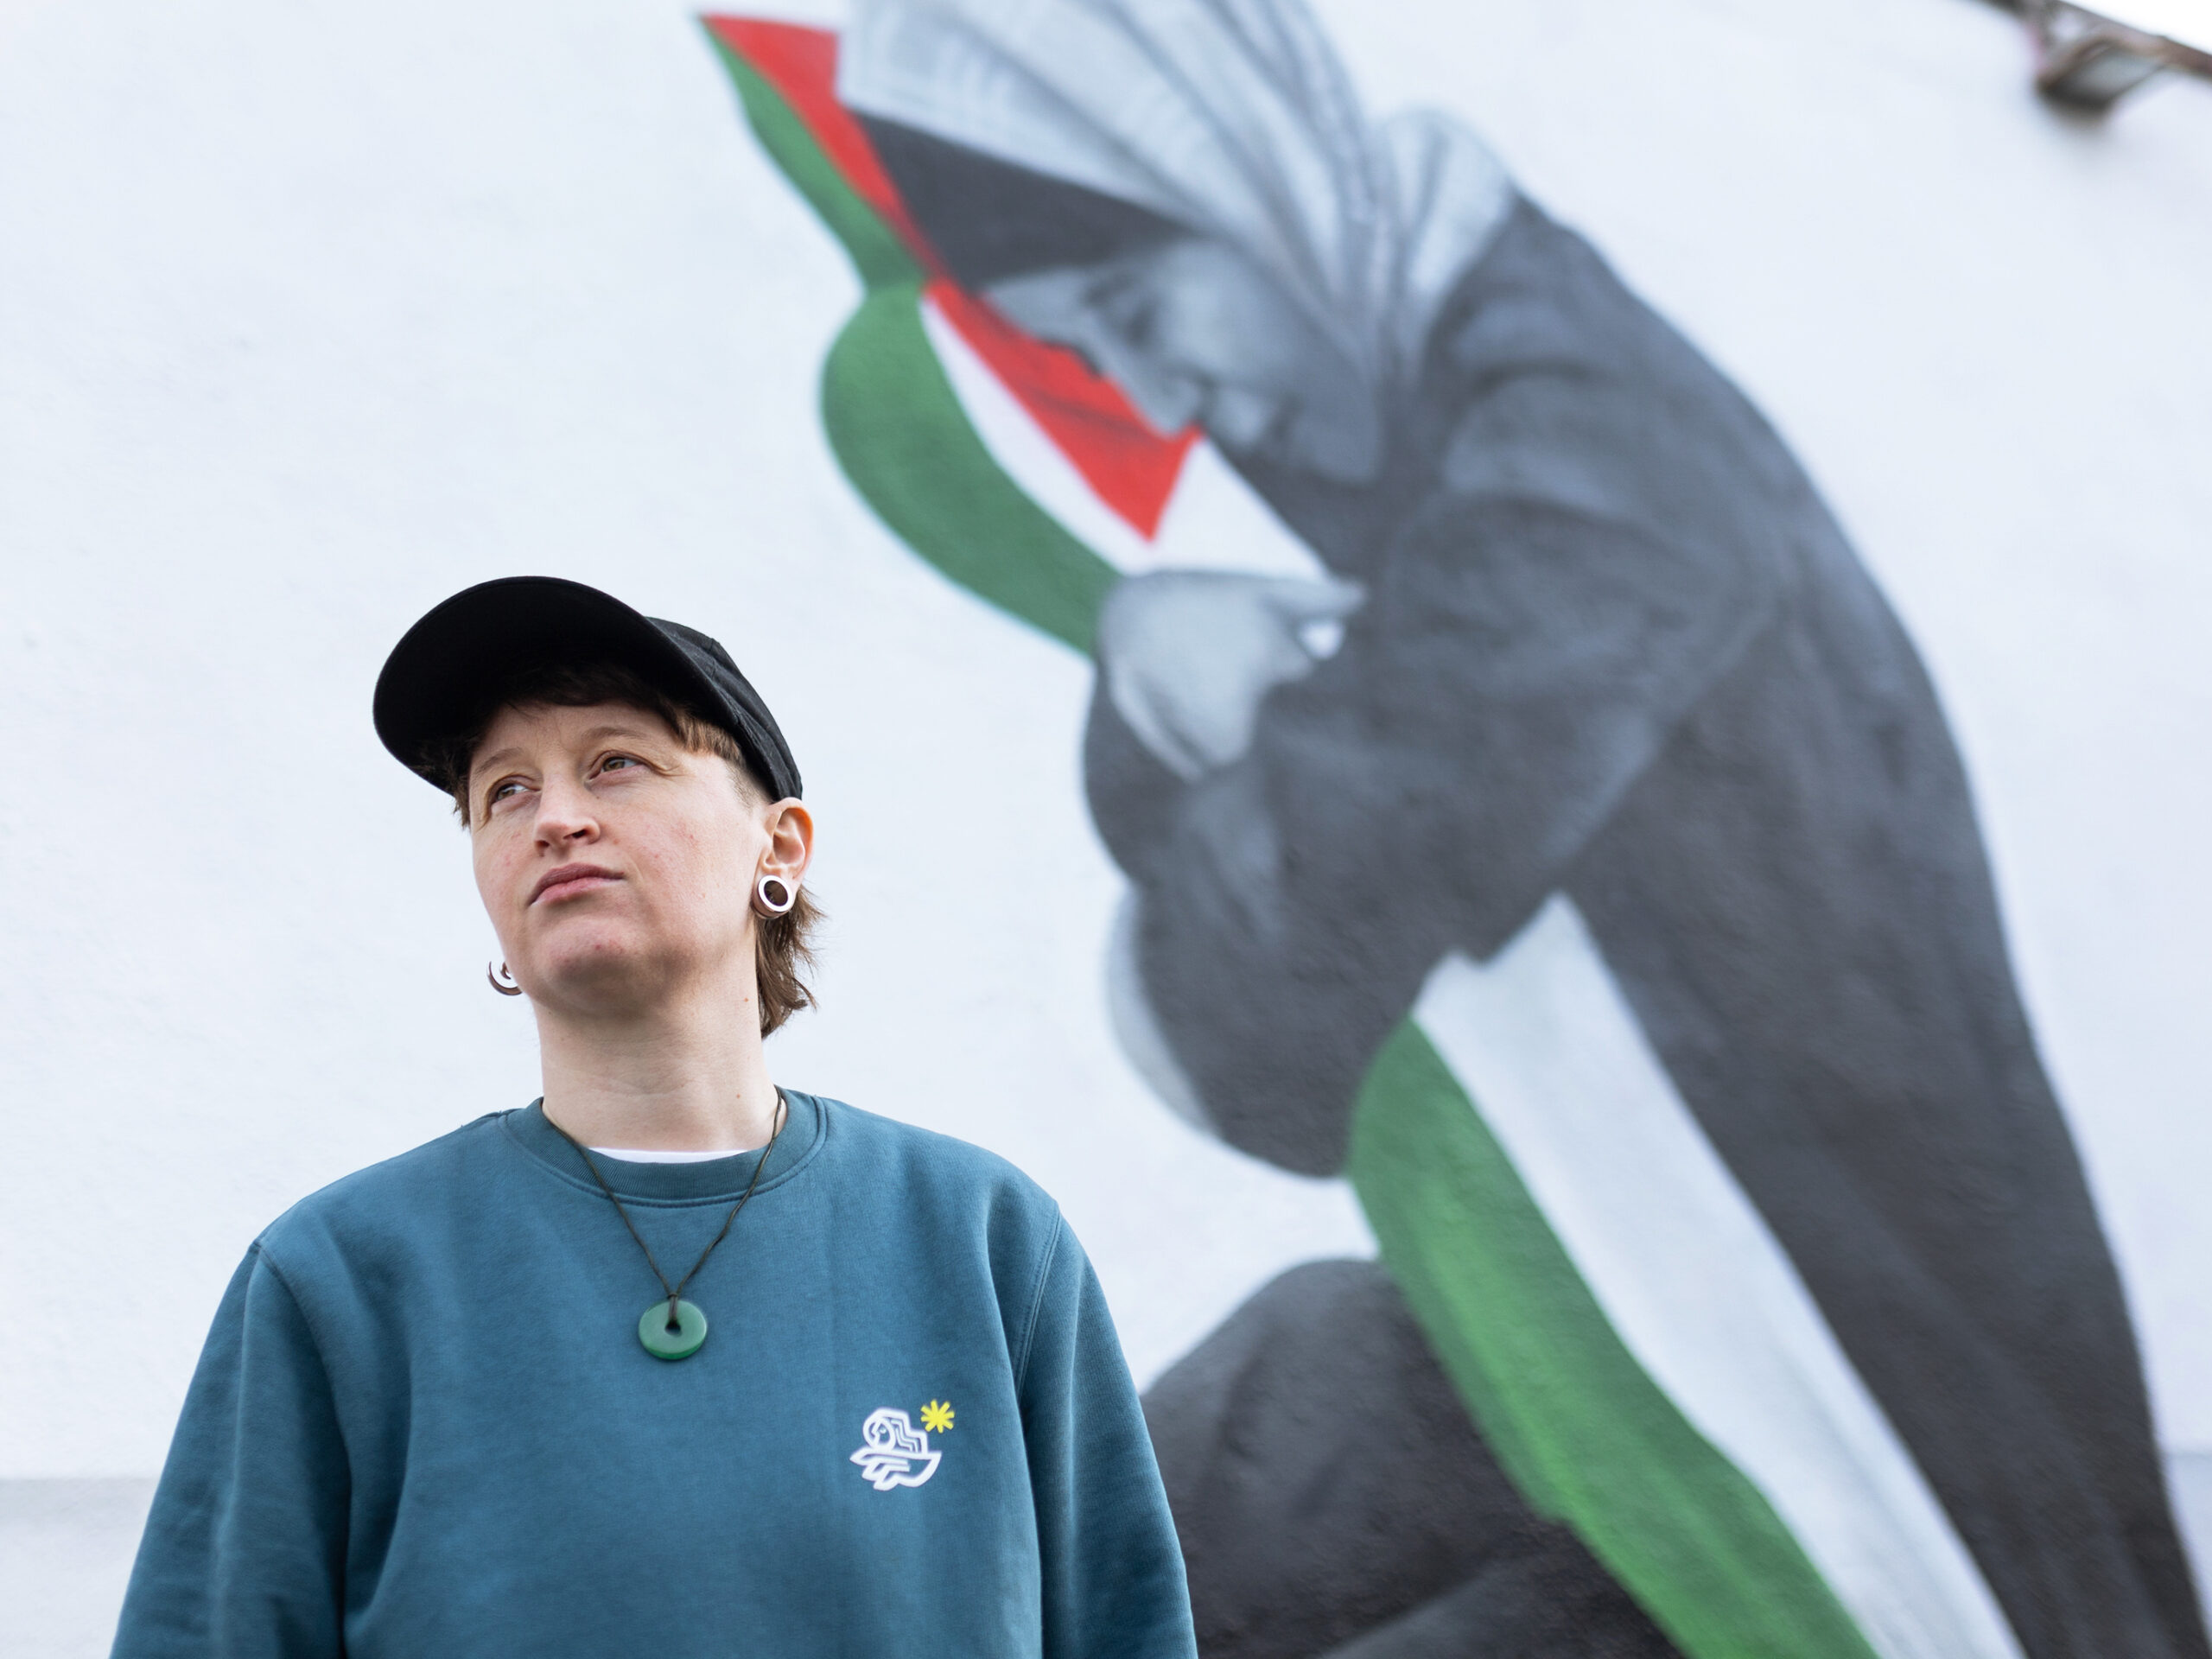 A grieving Palestinian, an Irish artist and the mural that brought them together